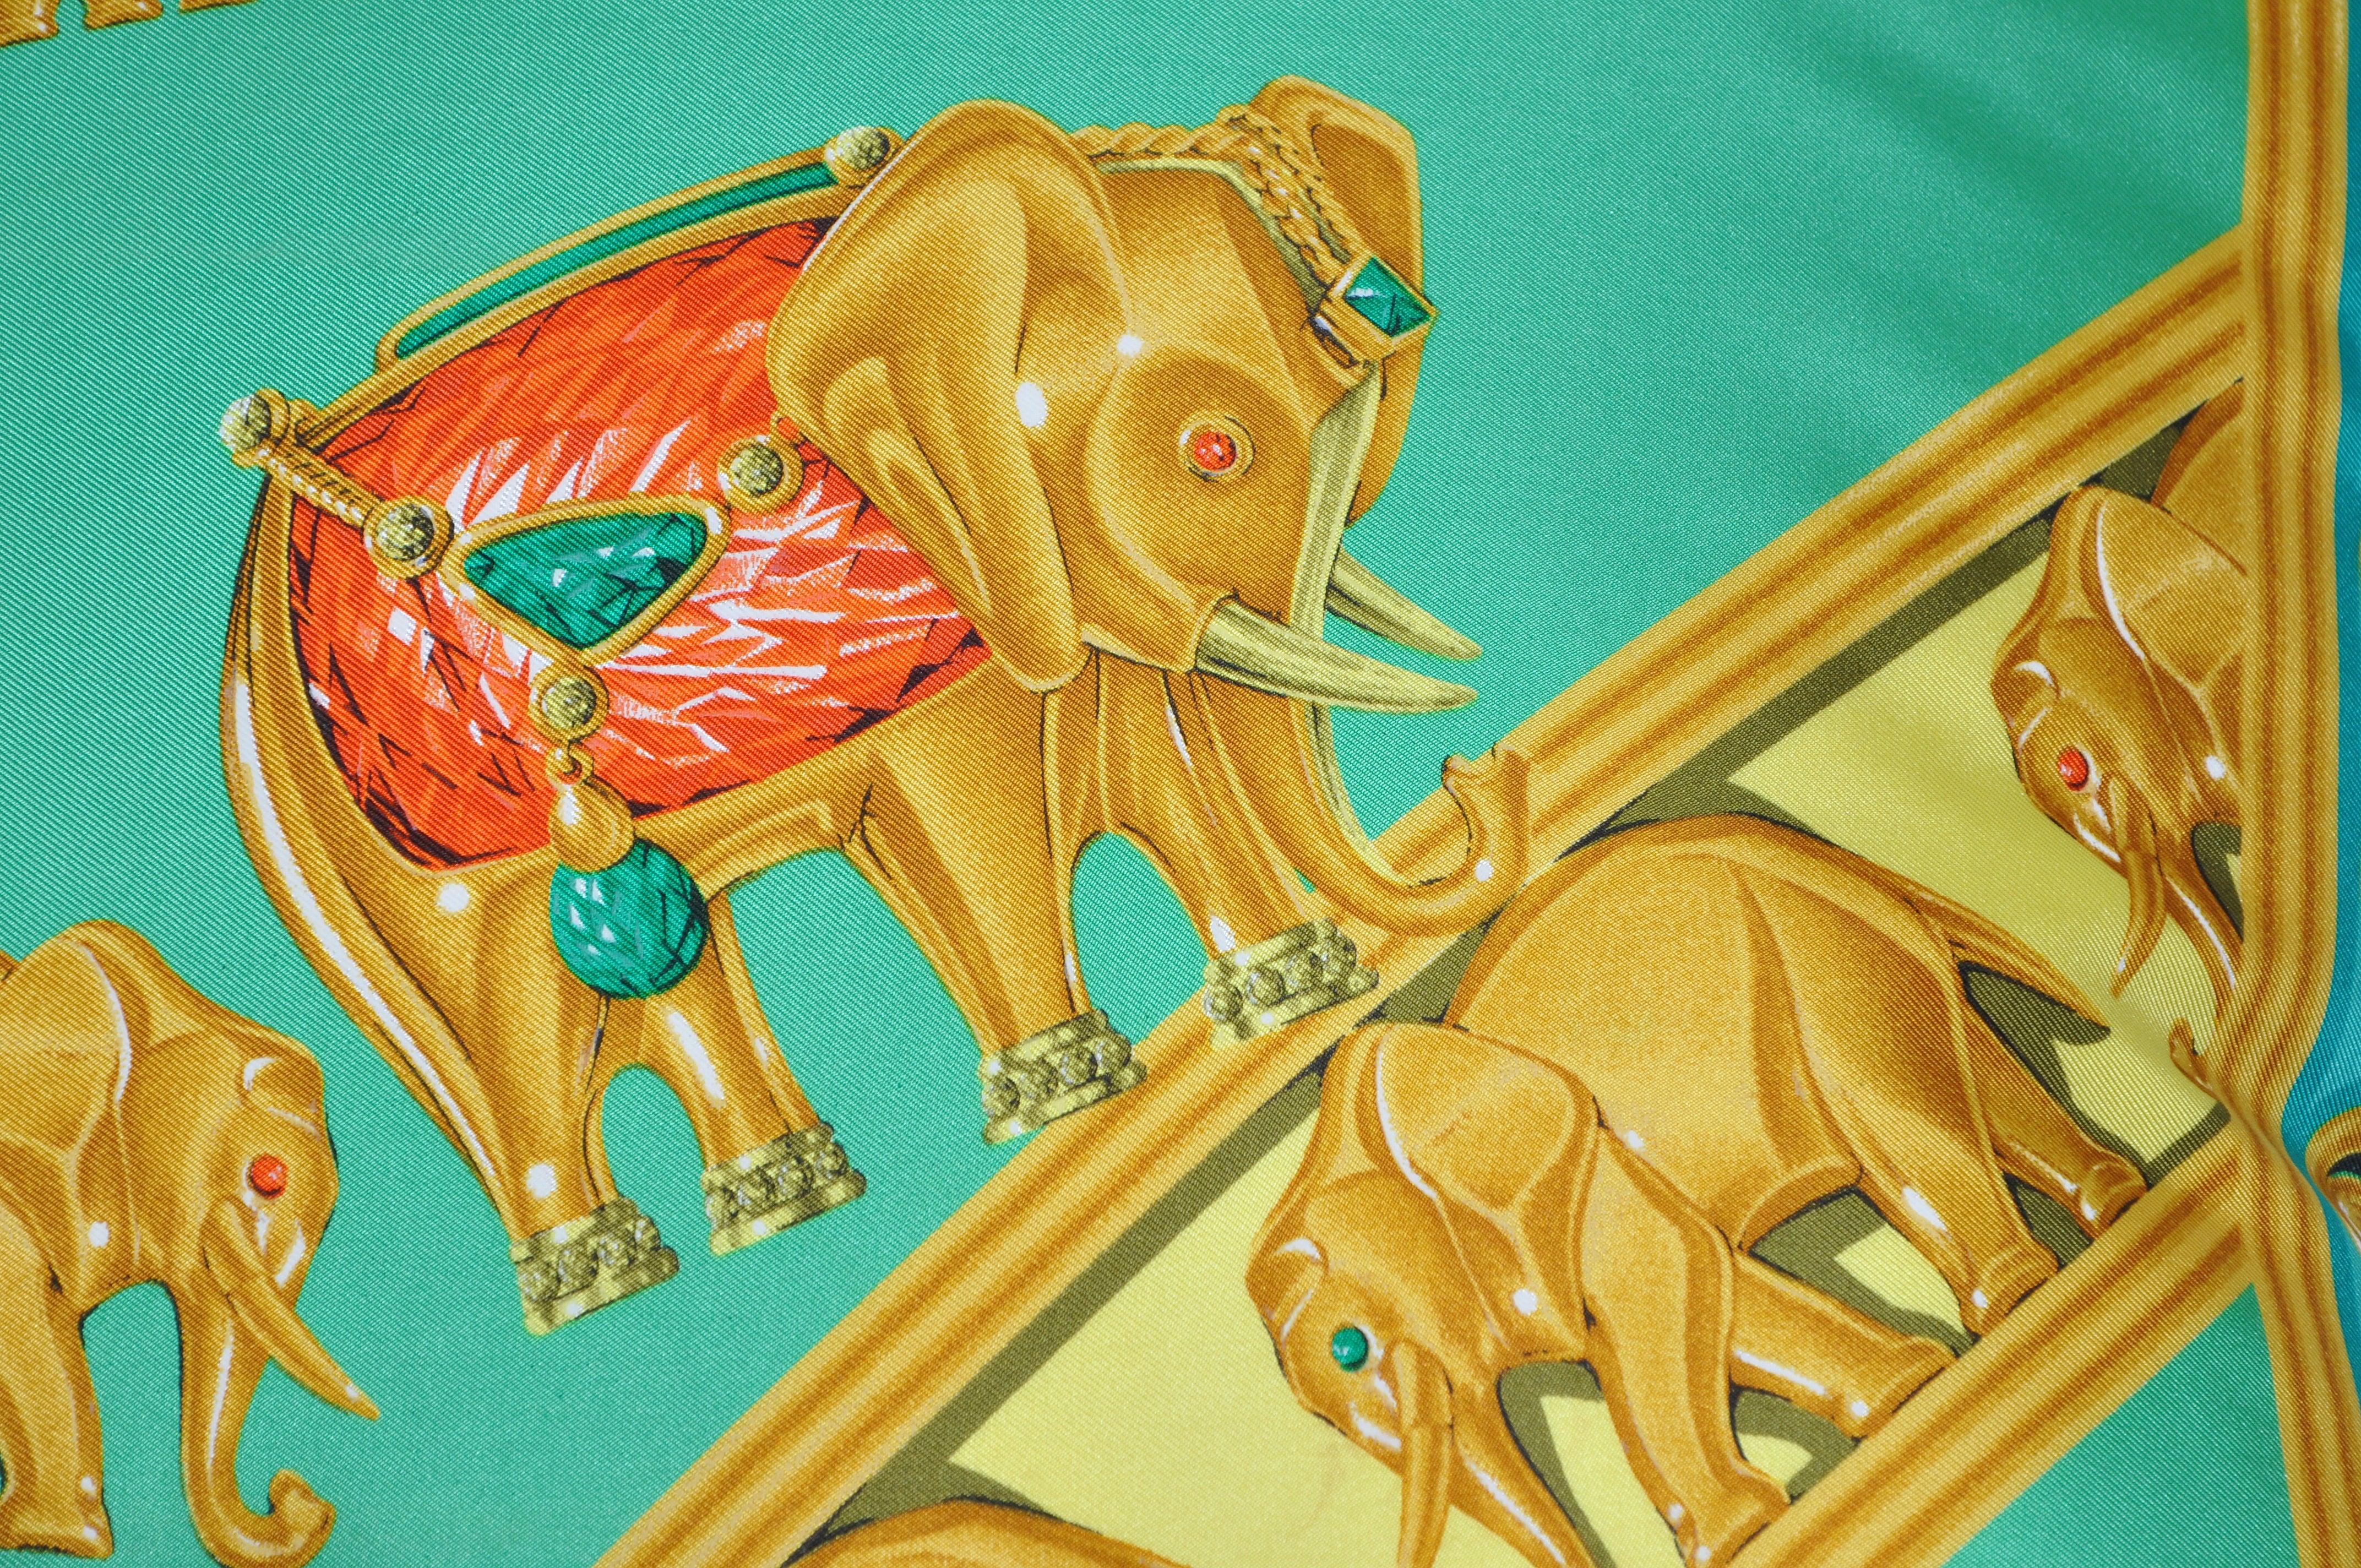 Large custom made one-of-a-kind luxury cushion (pillow) created from an exquisite rare vintage pure silk Cartier fashion scarf in a striking print. It illustrates exotic elephants in procession adorned with fabulous jewels. They spiral around the